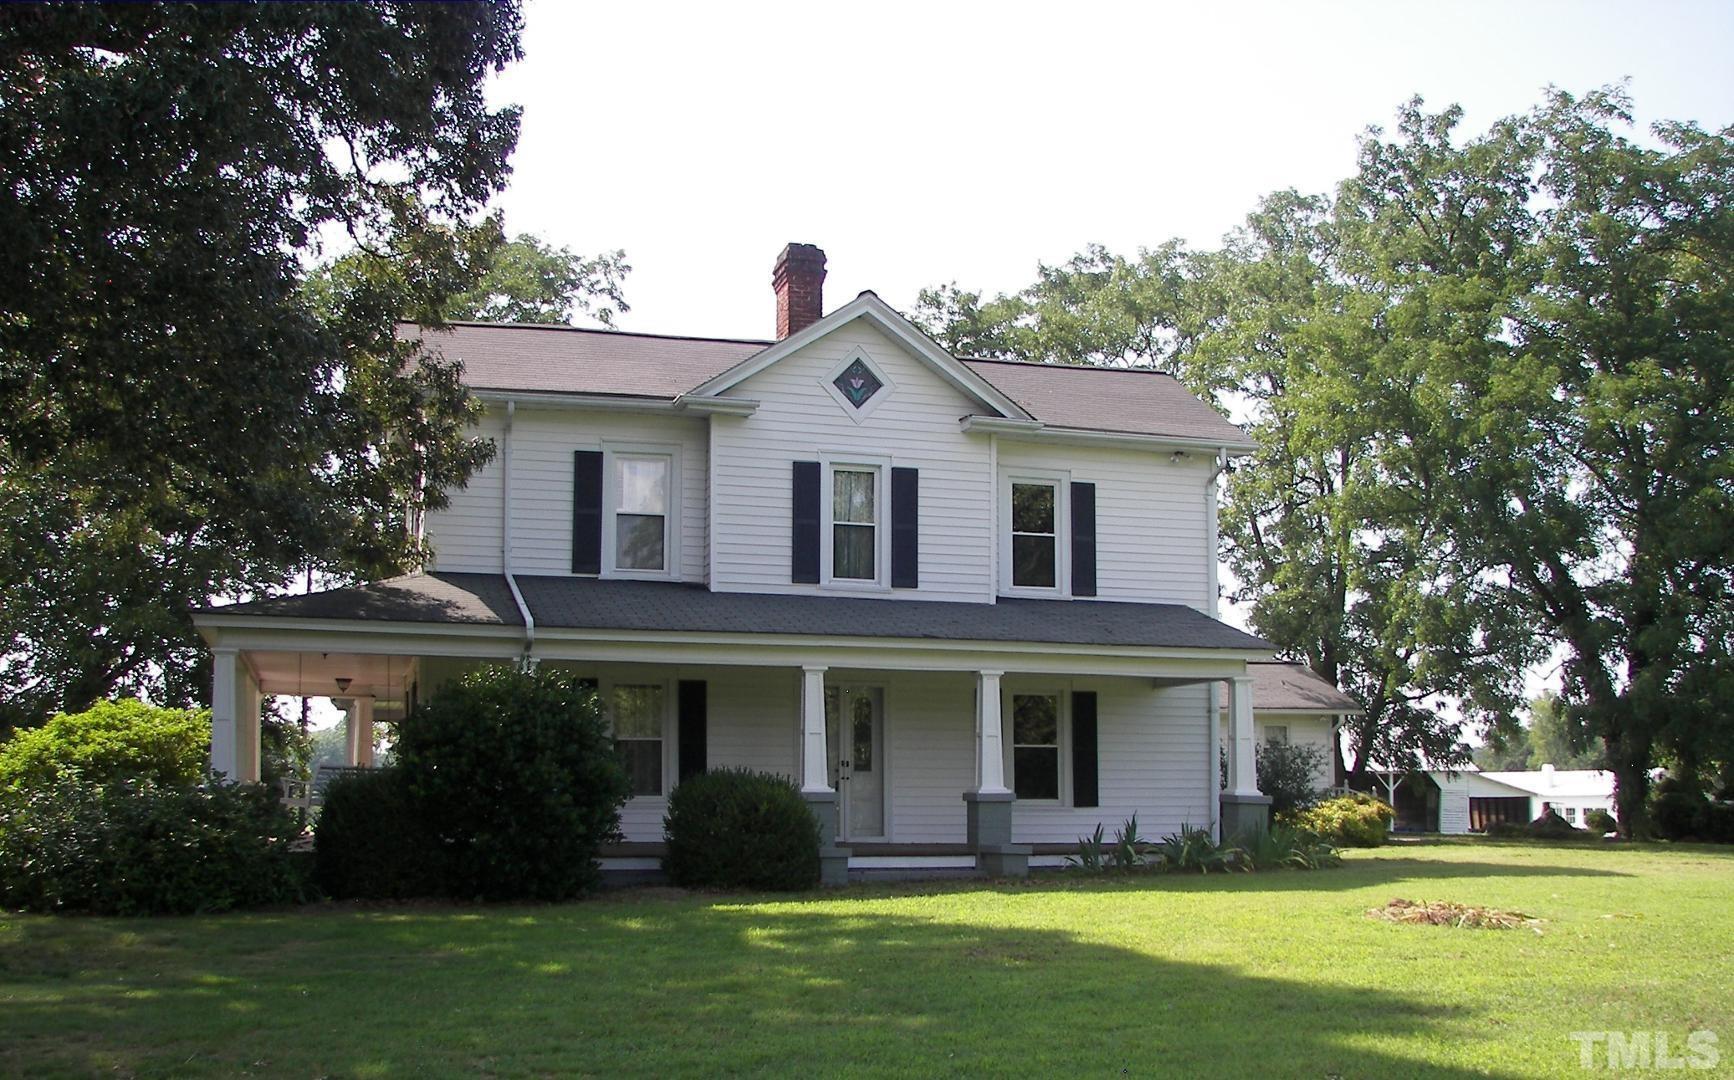 a front view of a house with garden and trees